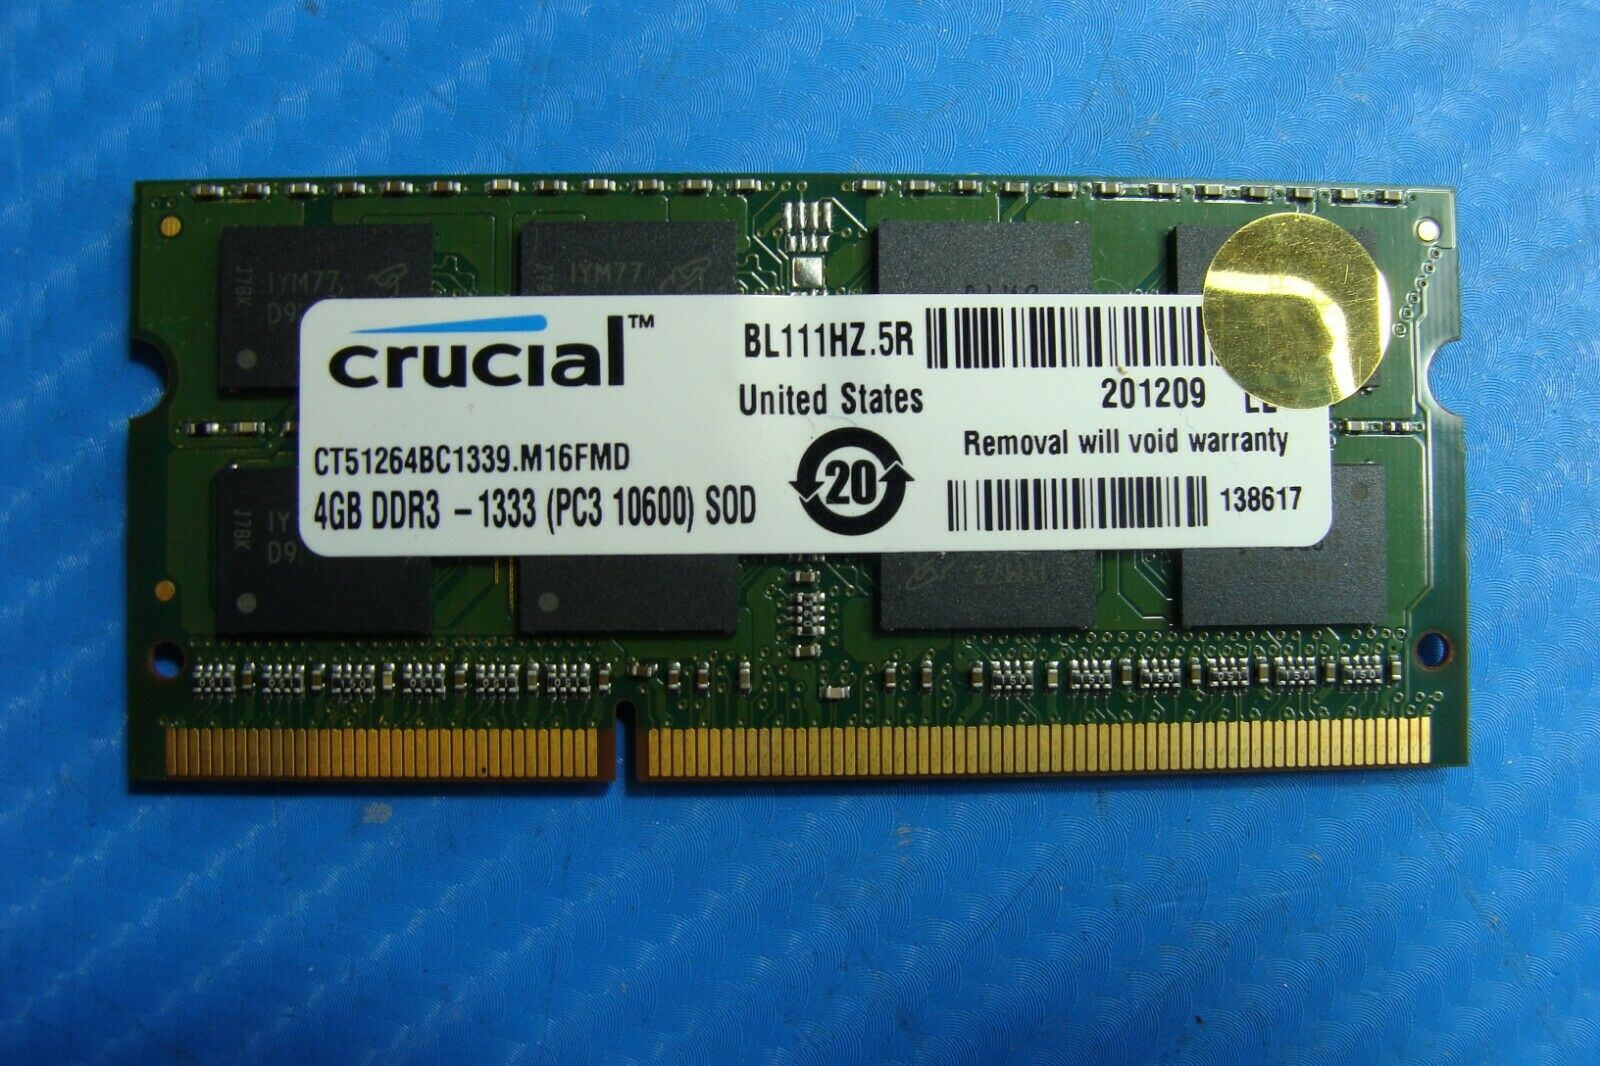 MacBook Pro A1286 Crucial 4Gb Memory Ram So-Dimm ct51264bc1339.m16fmd - Laptop Parts - Buy Authentic Computer Parts - Top Seller Ebay